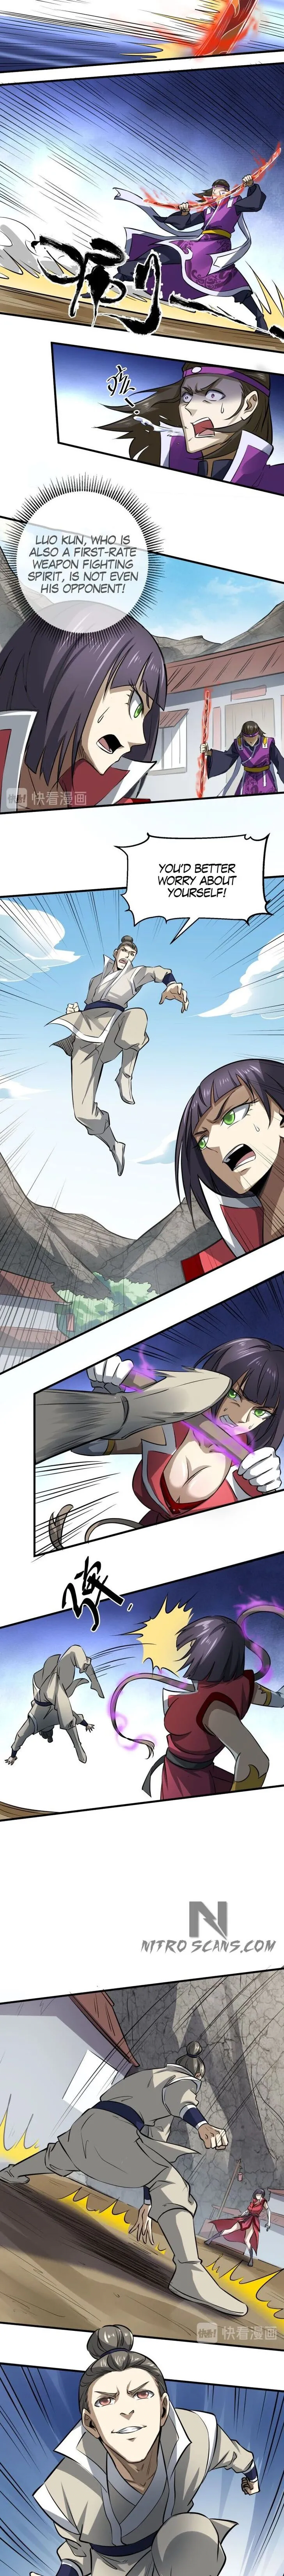 Fighting Spirit Mainland Chapter 014 page 10